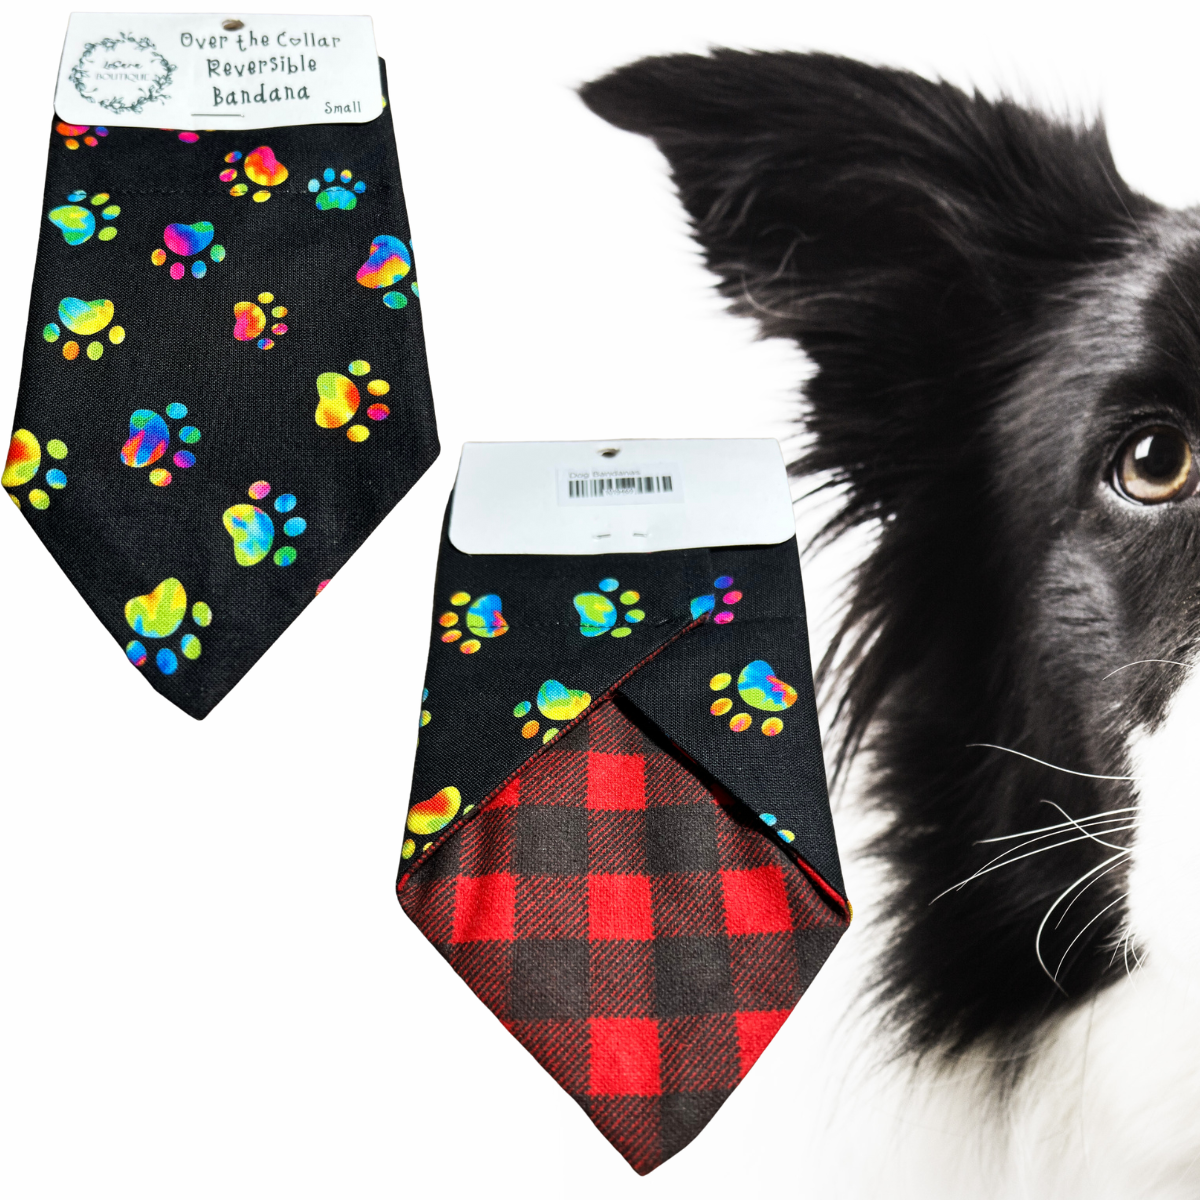 Small Reversible Over-the-Collar Dog Bandana (8" Wide by 6" Long)